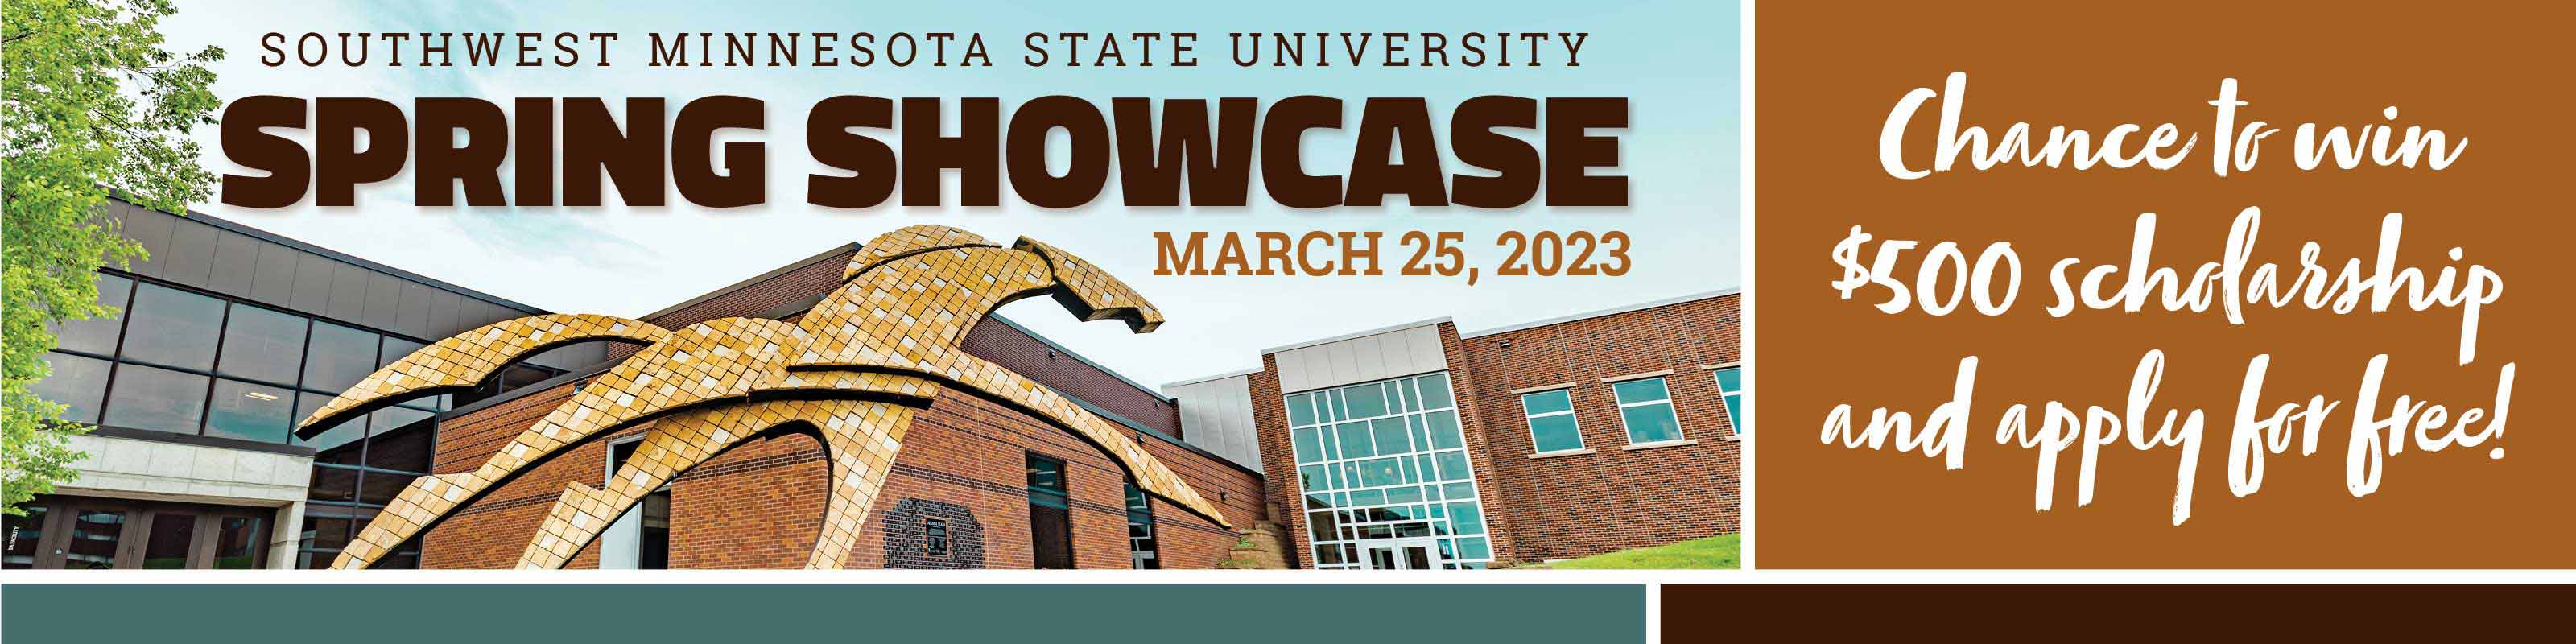 SMSU Spring Showcase - March 25, 2023 - Chance to Win $500 Scholarship and apply for free!